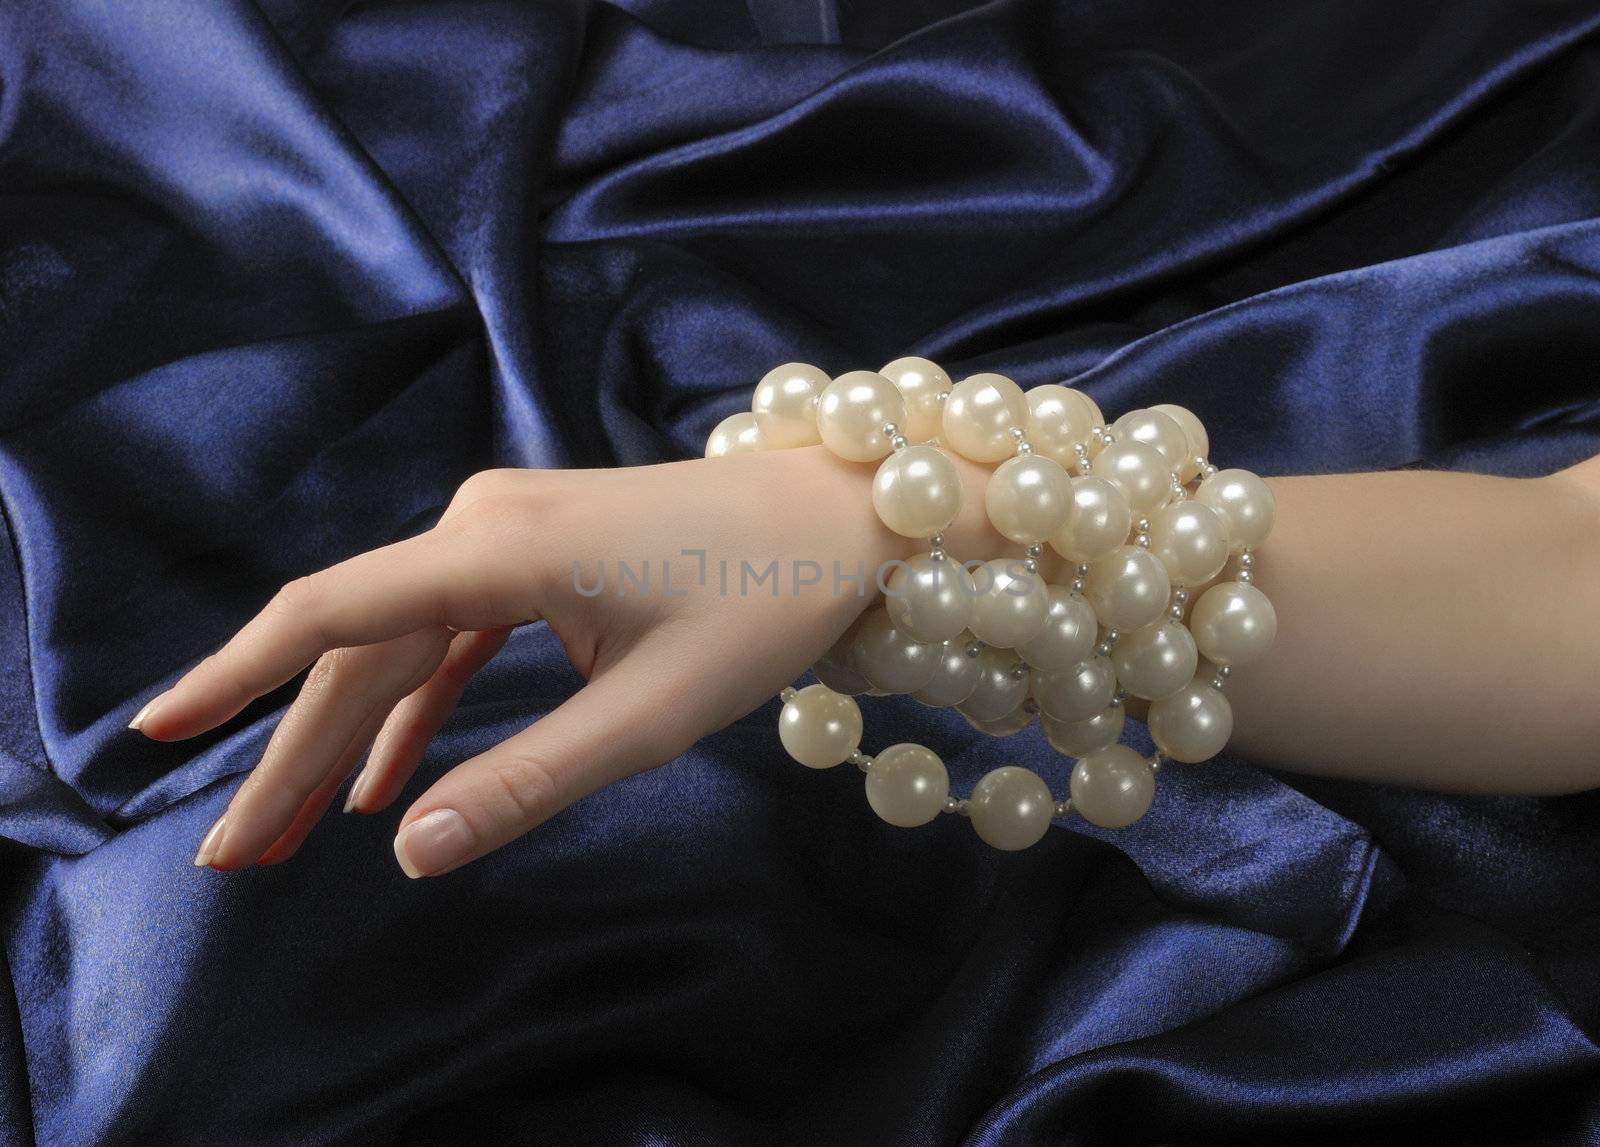 Woman's hand wearing perls necklace on blue silky background